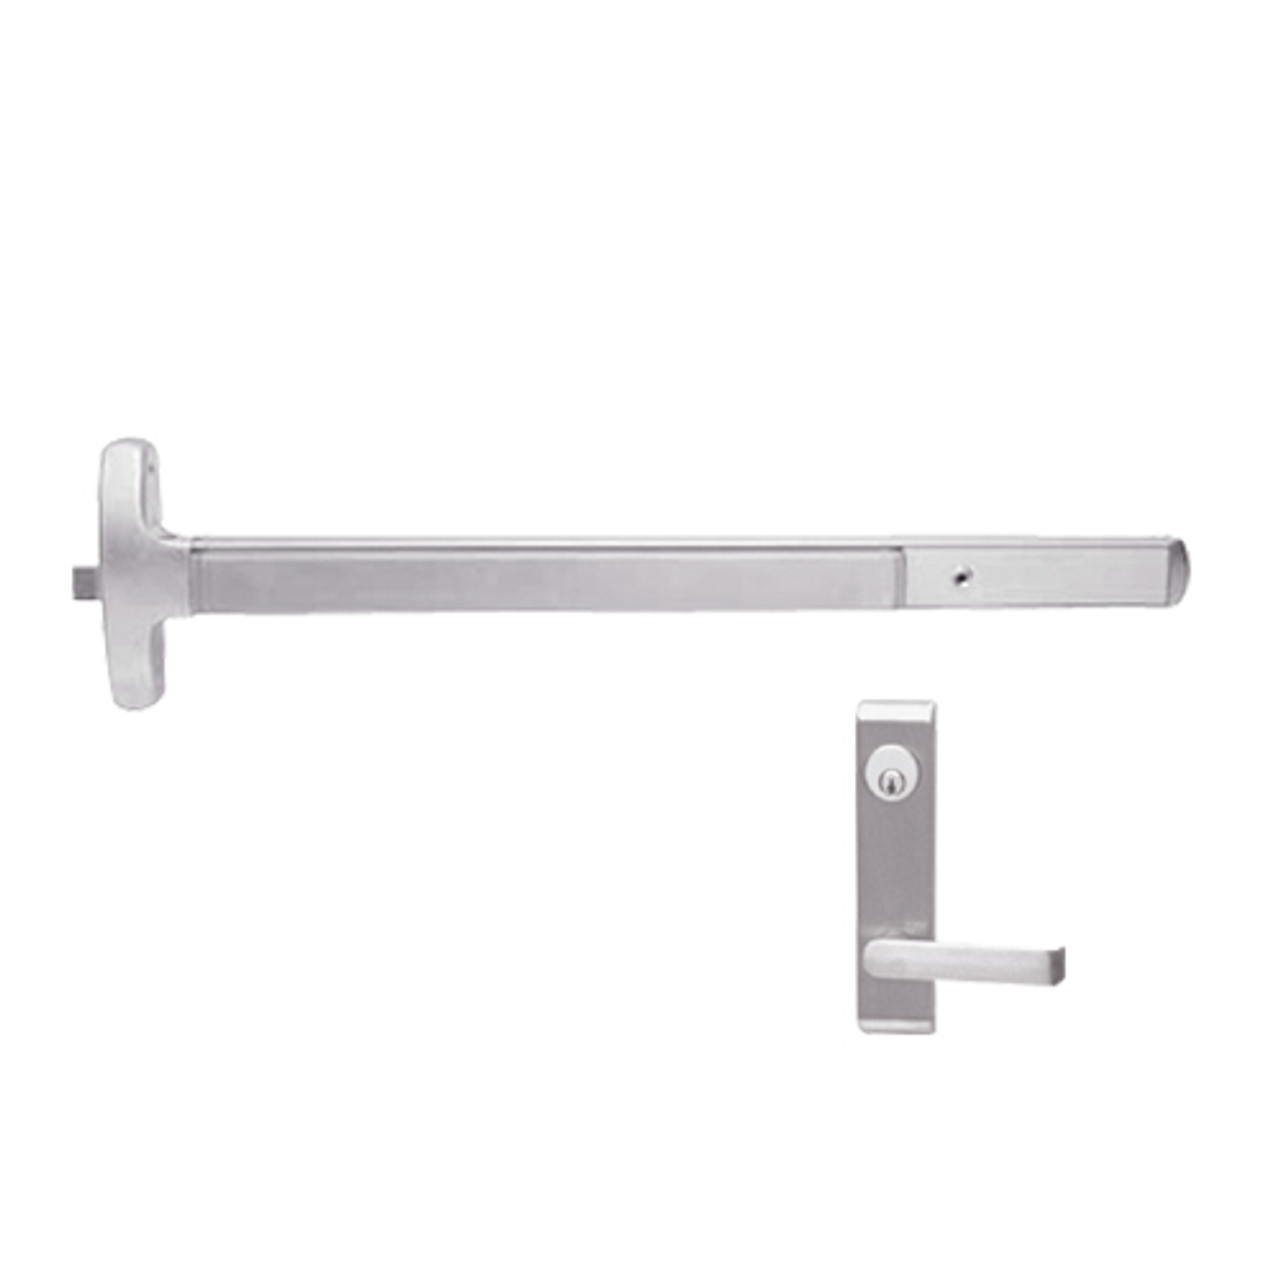 24-R-L-NL-DANE-US32-4-LHR Falcon Exit Device in Polished Stainless Steel